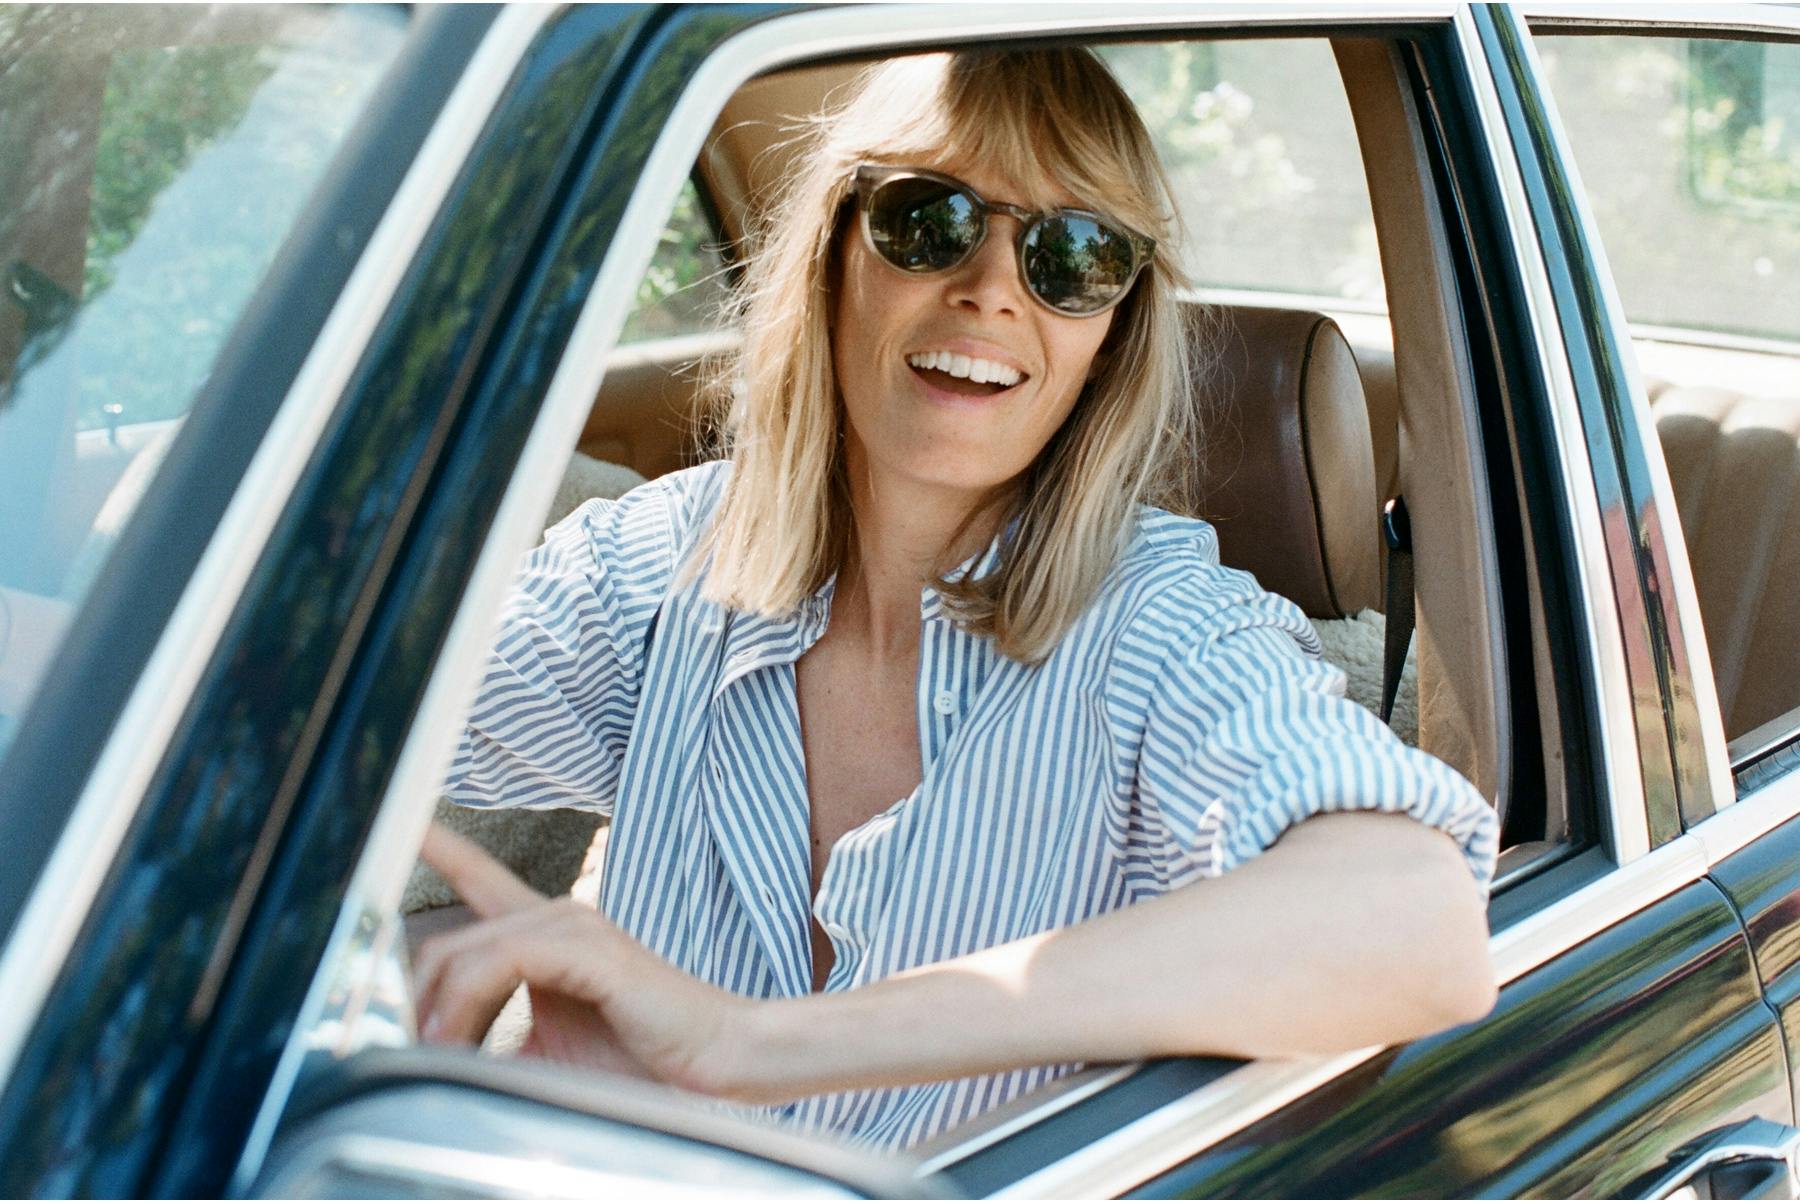 Jesse Kamm wears a light blouse and sunglasses while sitting in a car